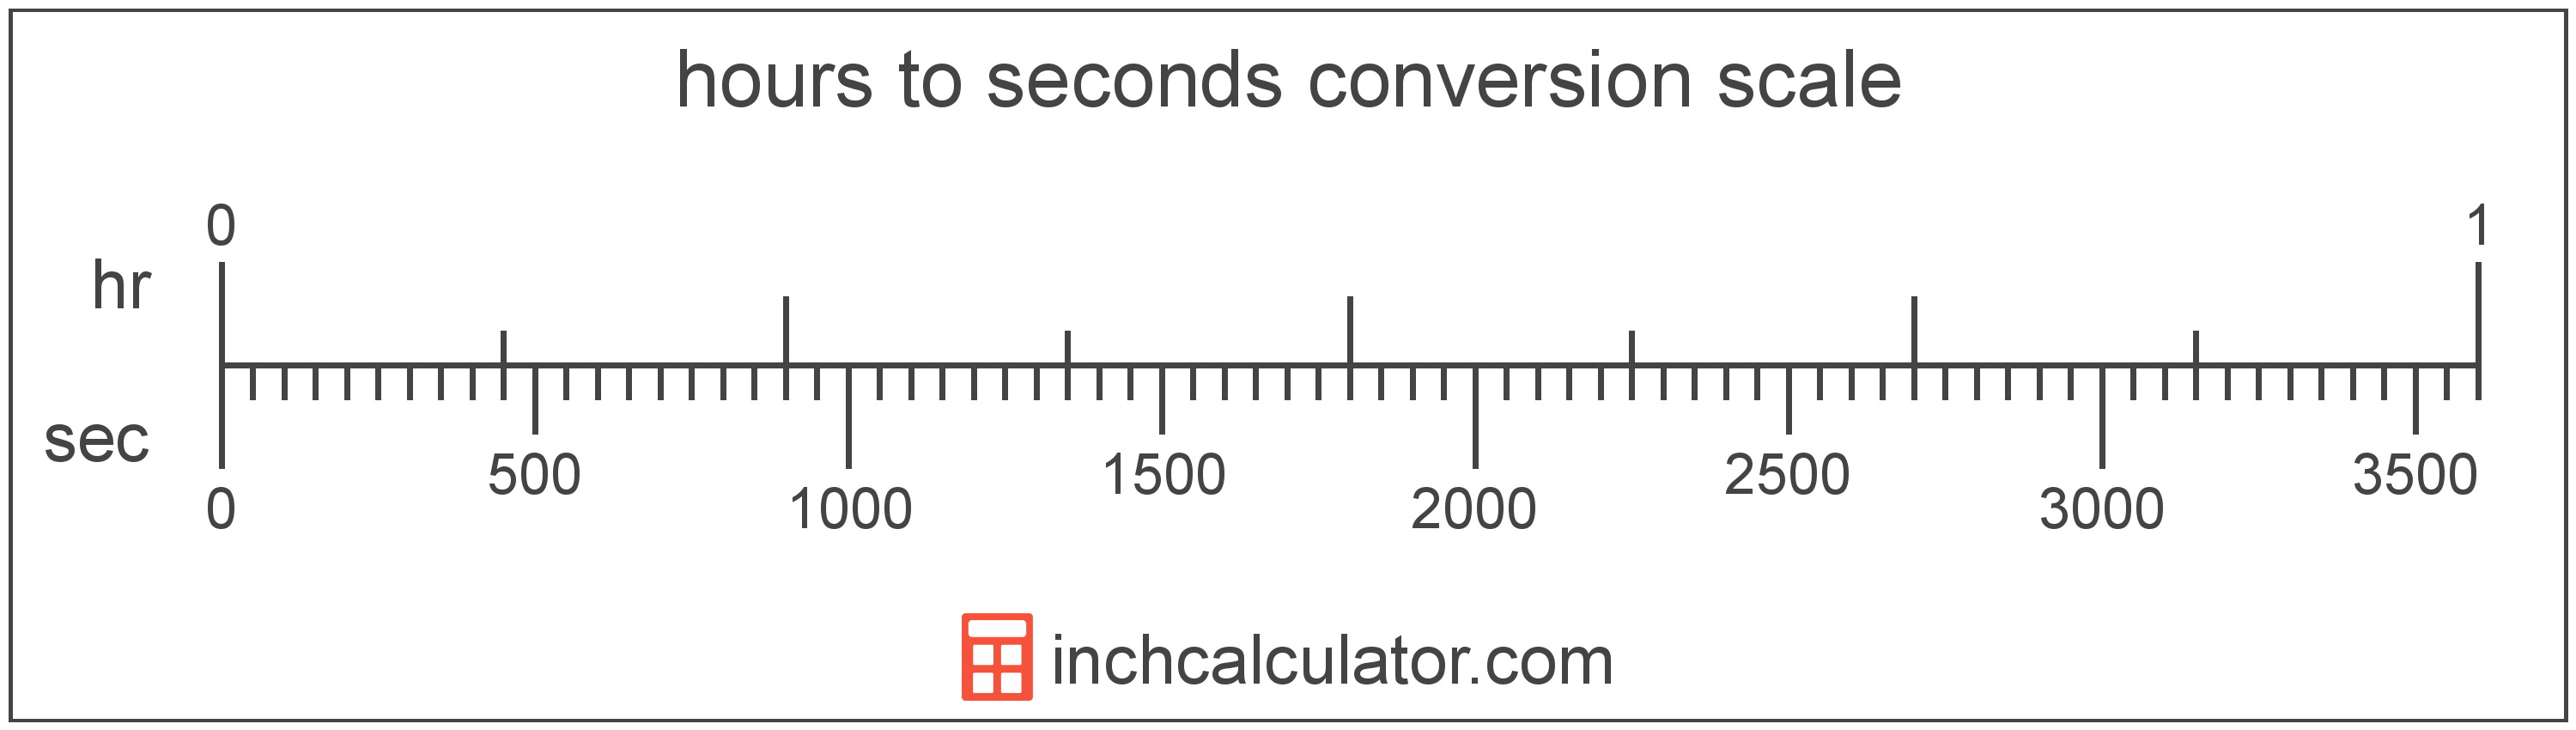 Seconds to Hours Conversion (sec to hr) - Inch Calculator